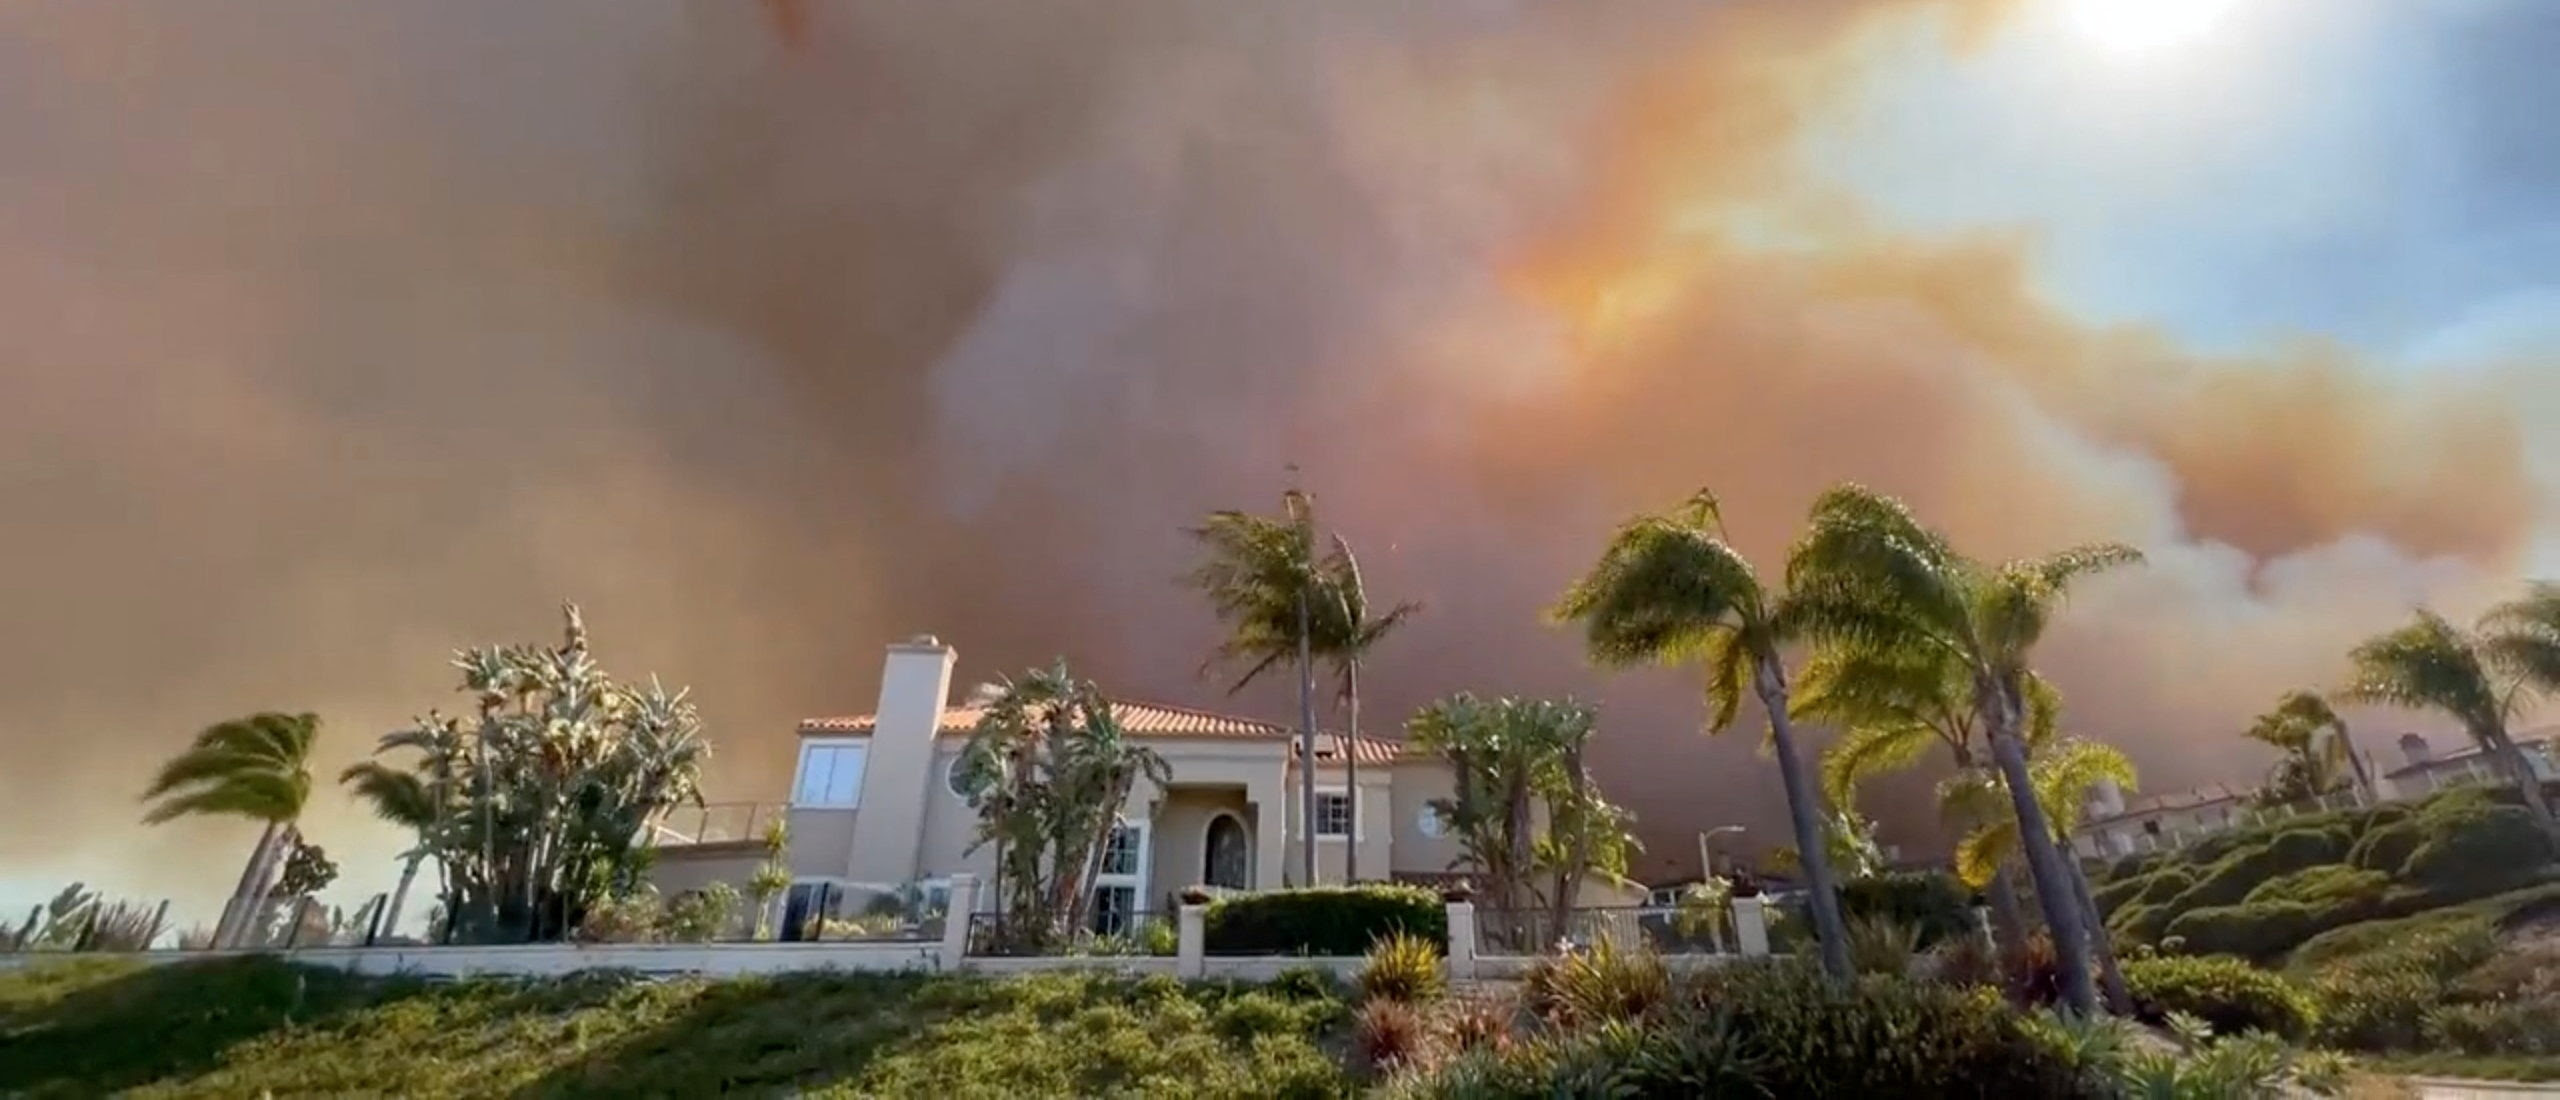 Wildfires Engulf And Destroy An Iconic California Seaside Town